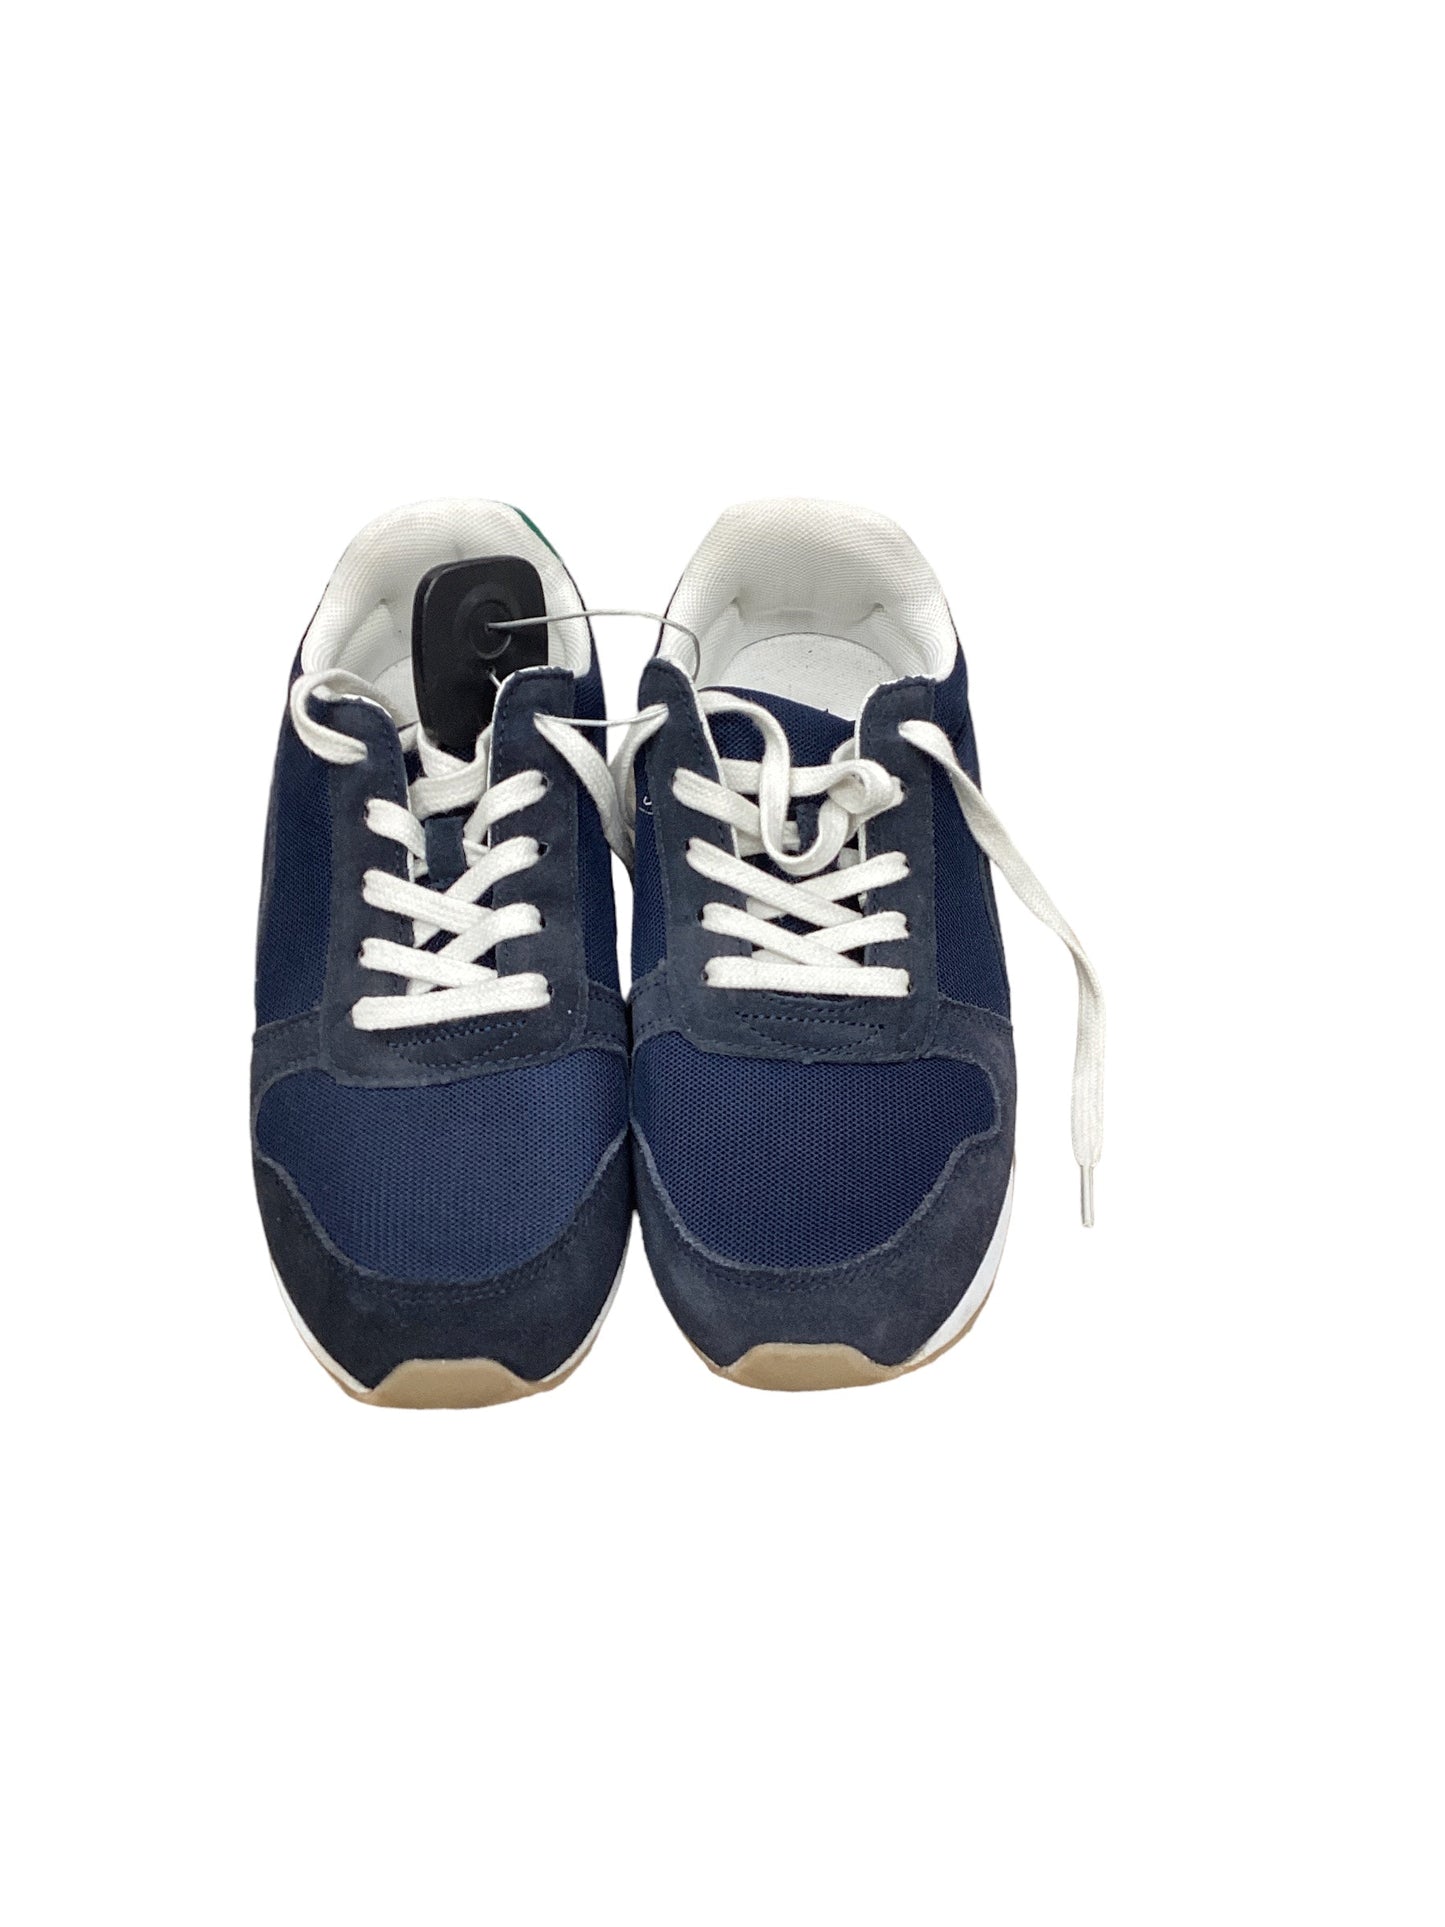 Shoes Sneakers By J Crew  Size: 7.5